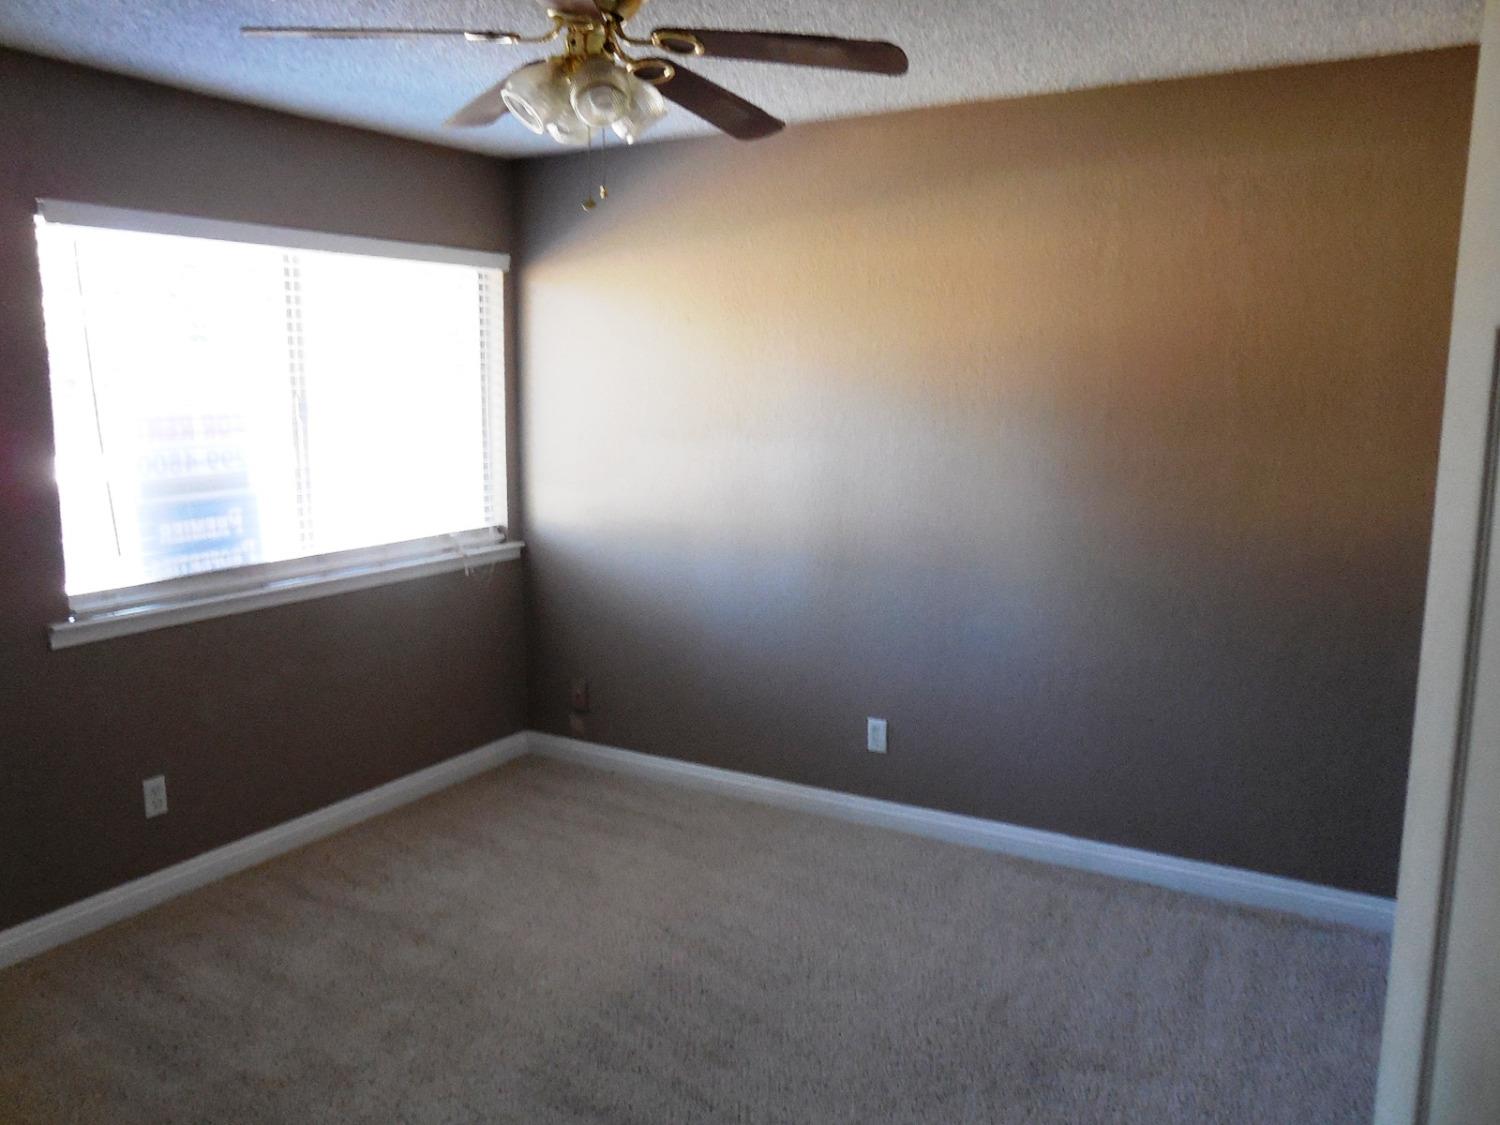 Great investment property! Near shopping, restaurants, and Fresno State University. Public transportation is also nearby. These units are easy to rent. Seller will give credit for repairs.